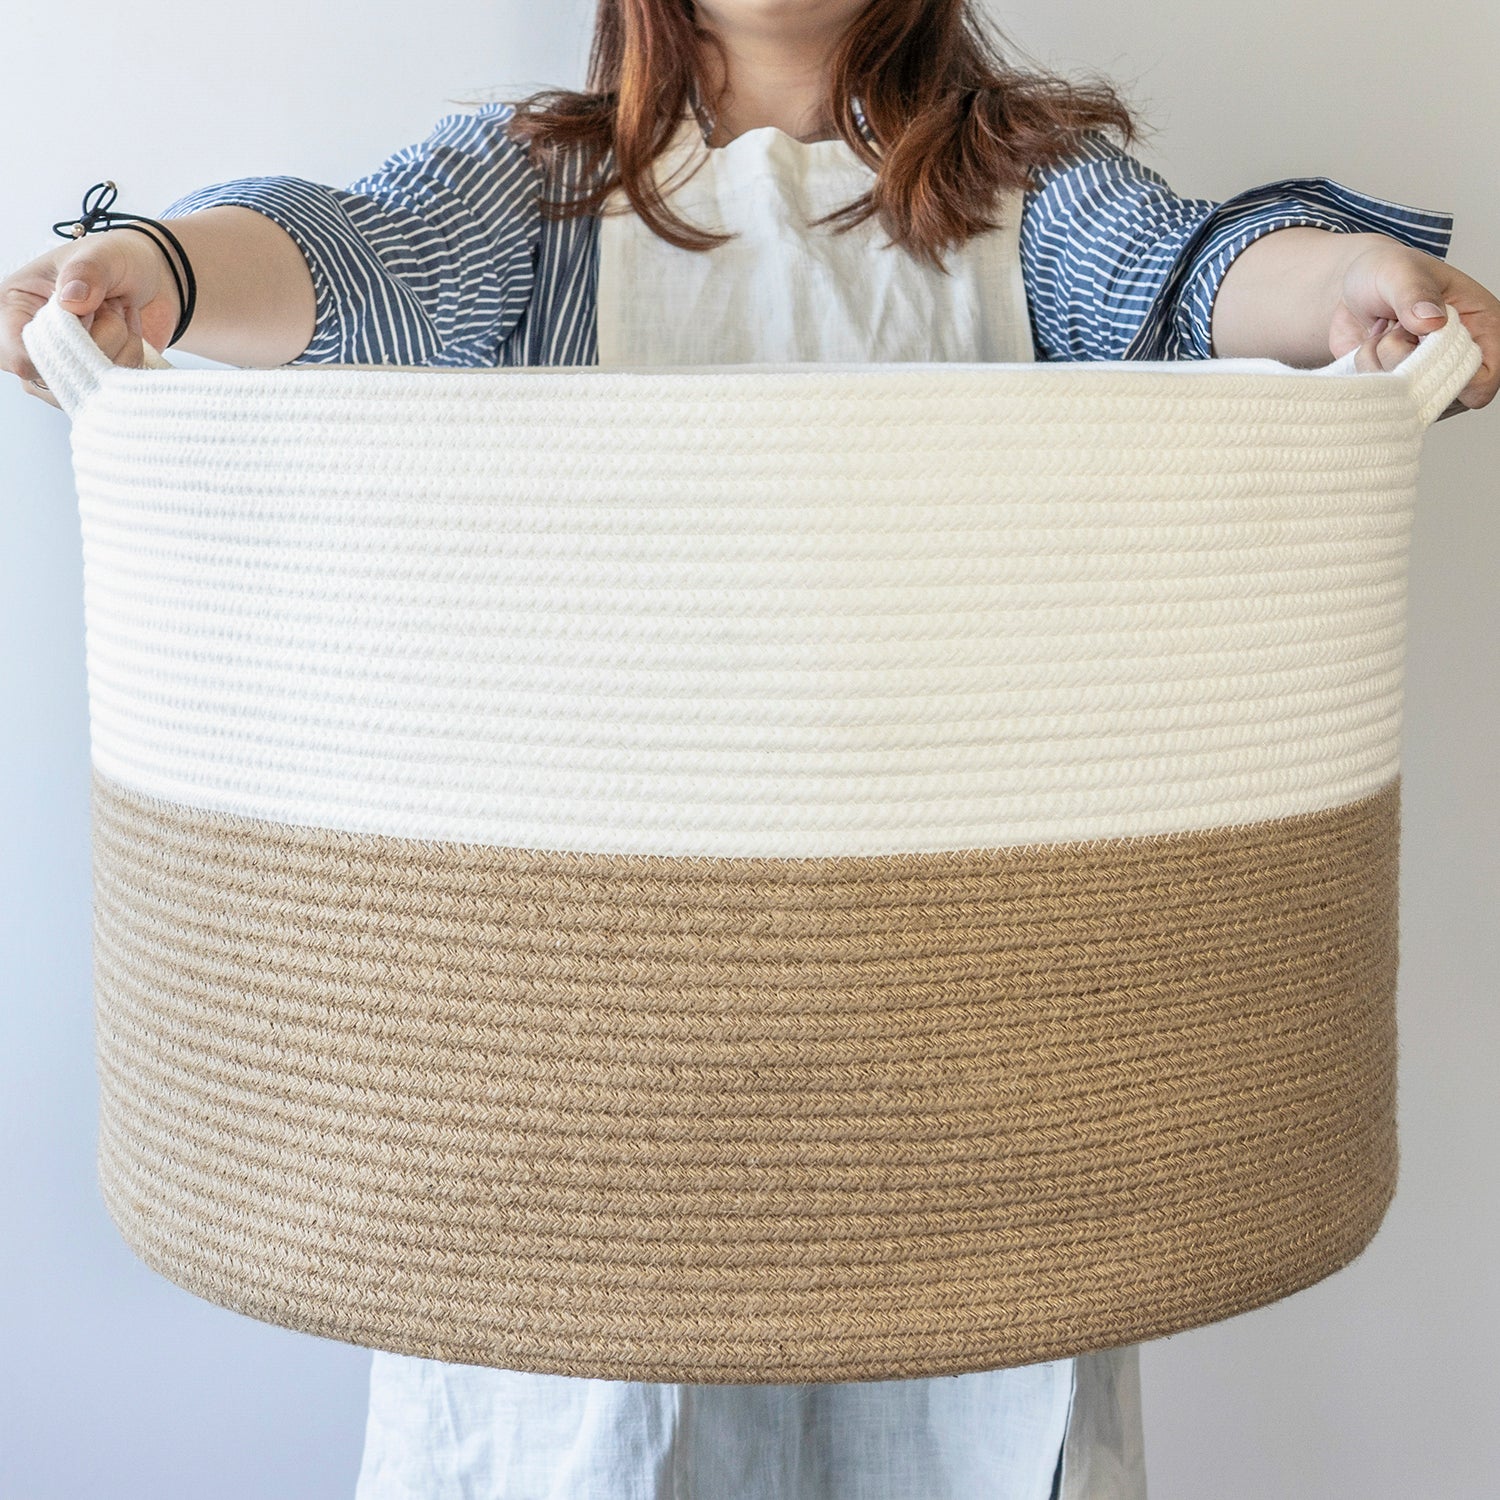 Large Handwoven Decorative Storage Basket in Twisted Sea Grass